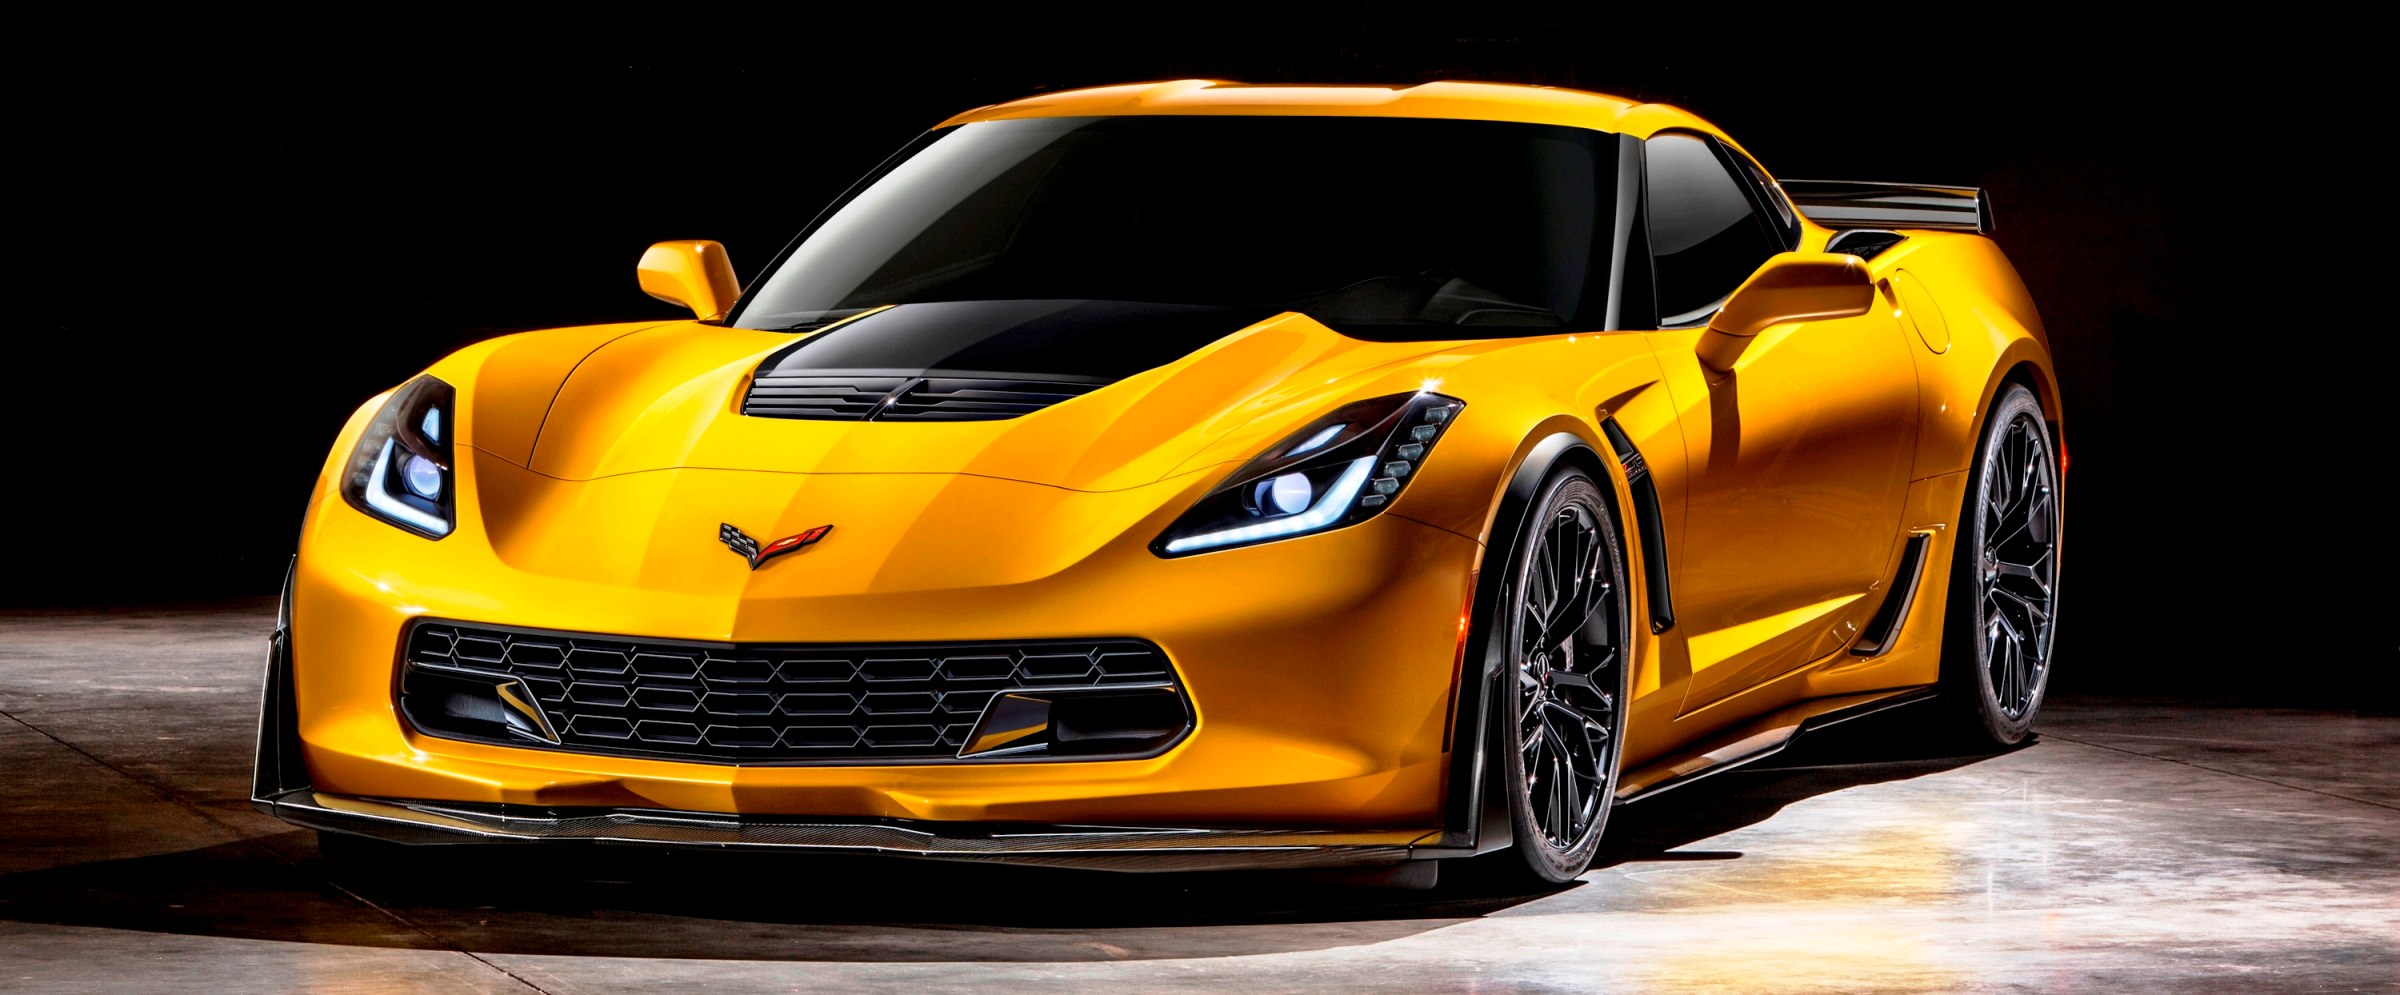 Z06 Official Debut In Super High Resolution Image Tech